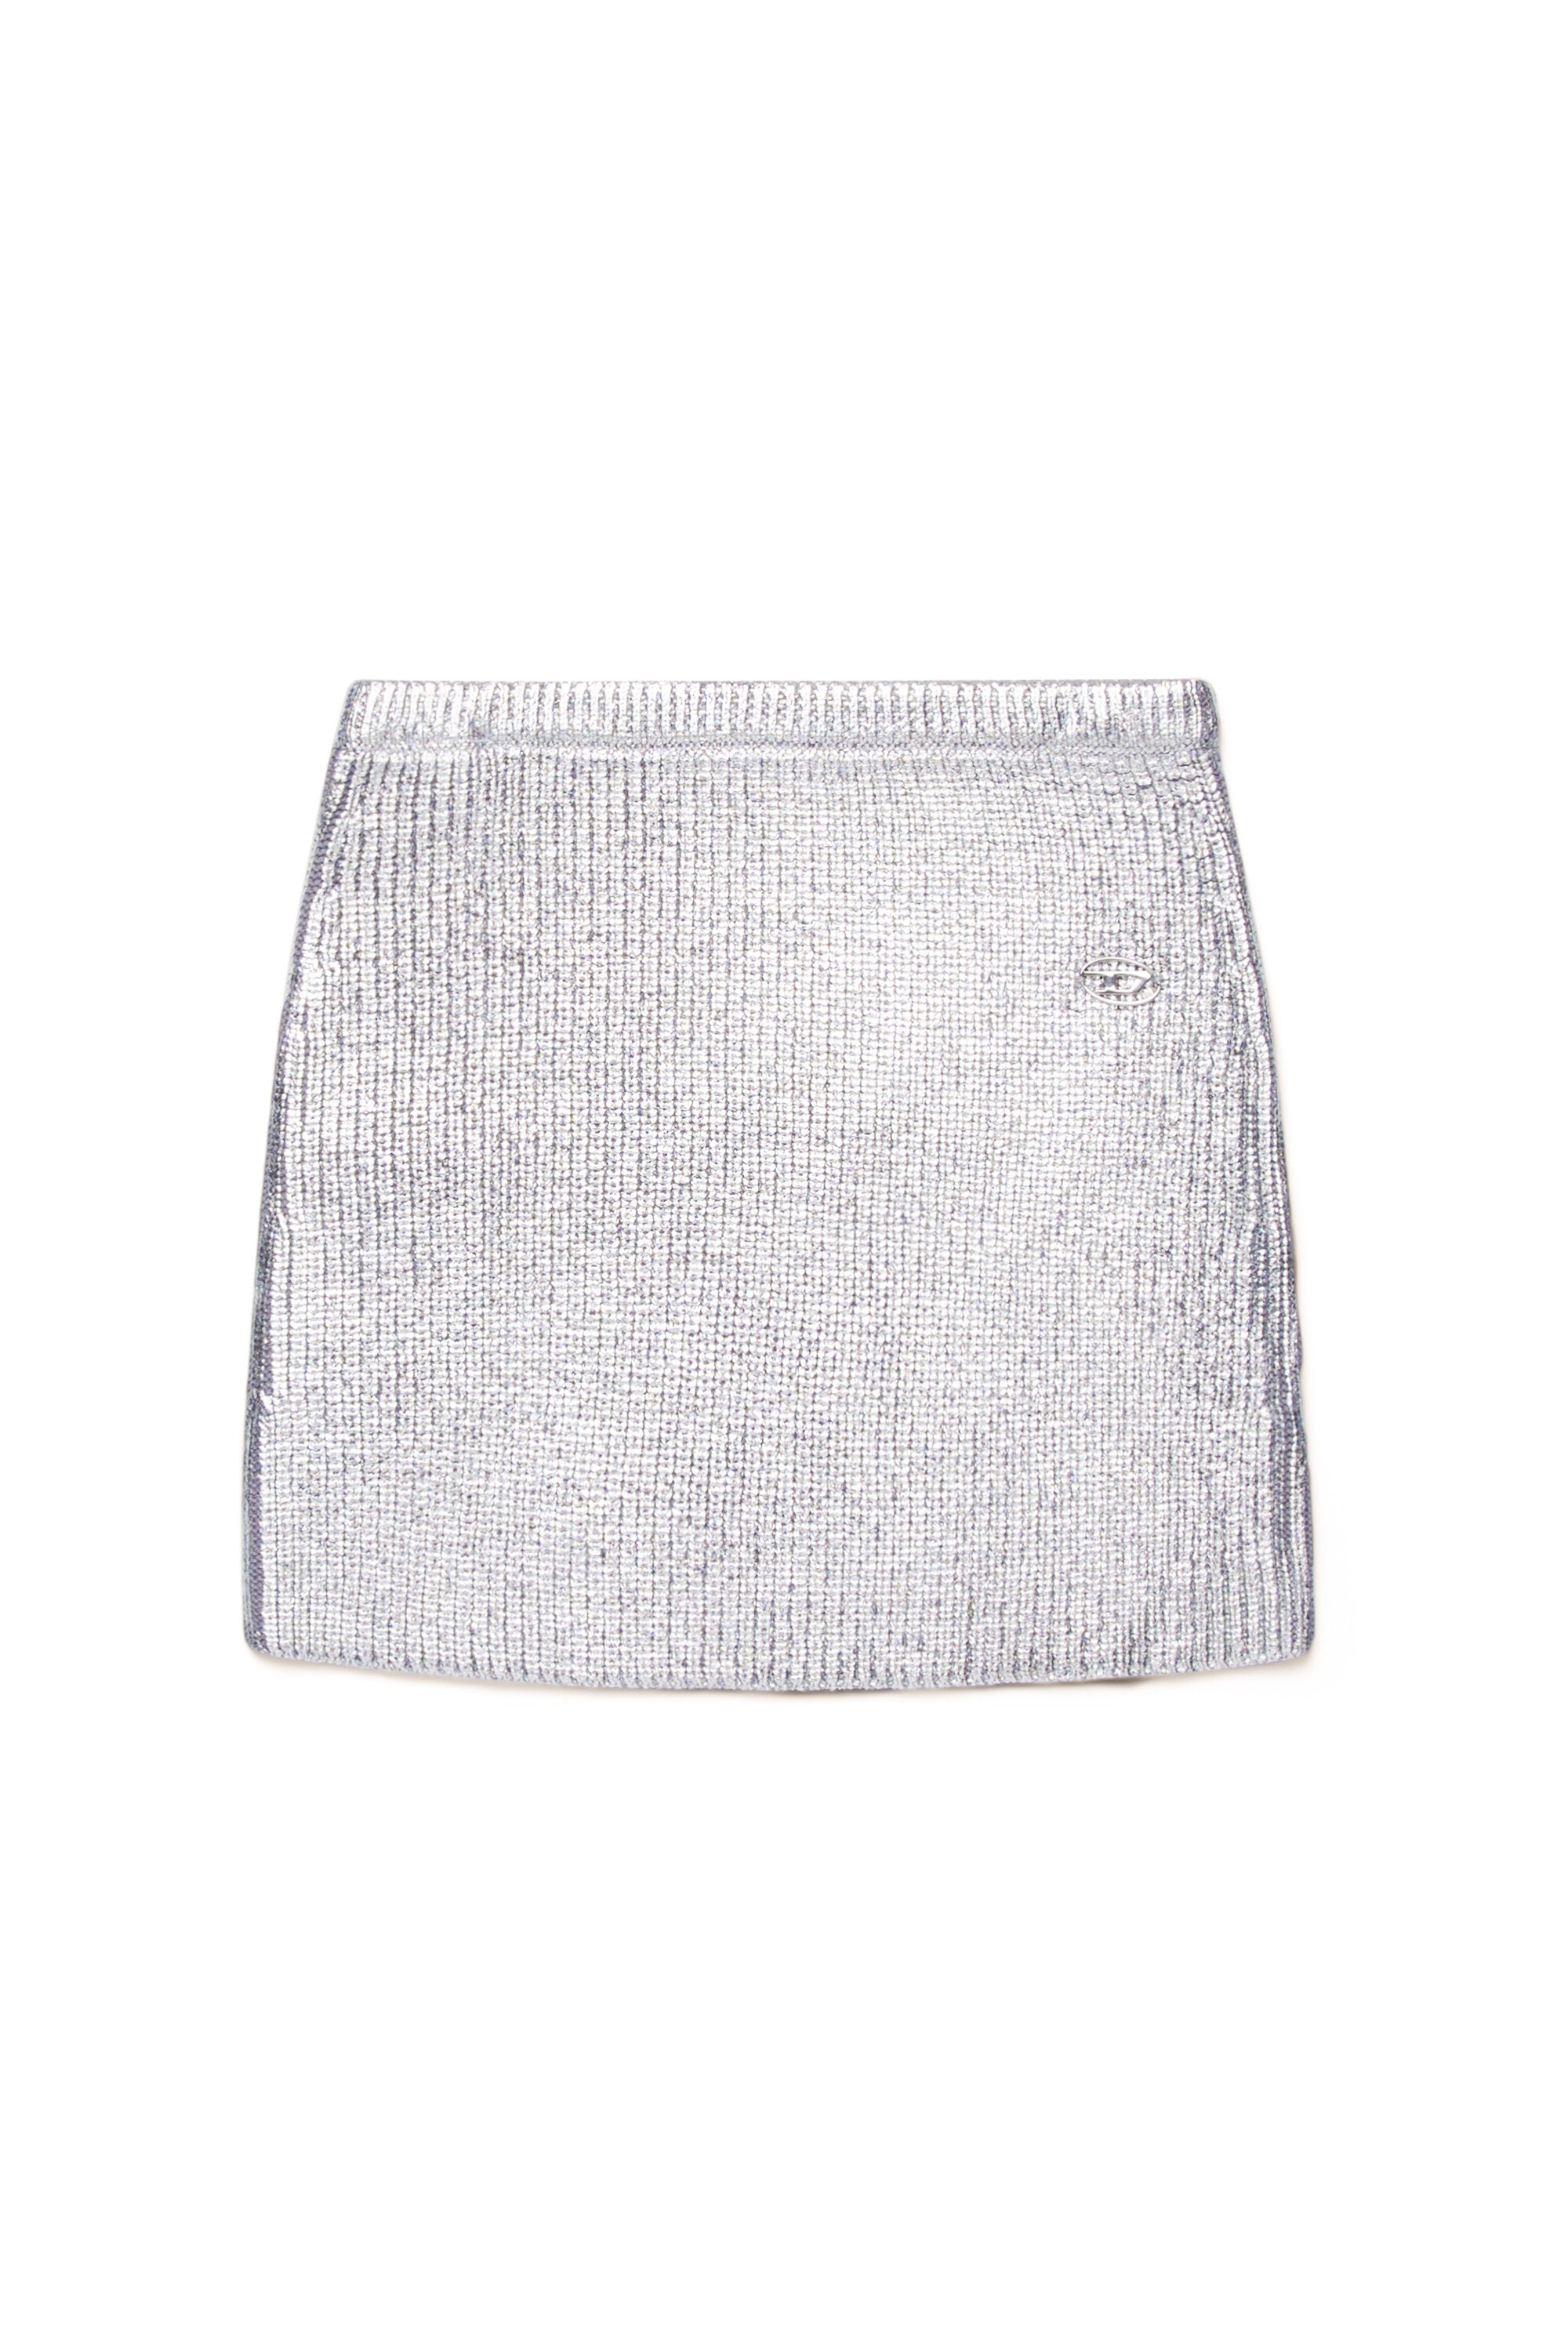 All-over silver mylar ribbed skirt